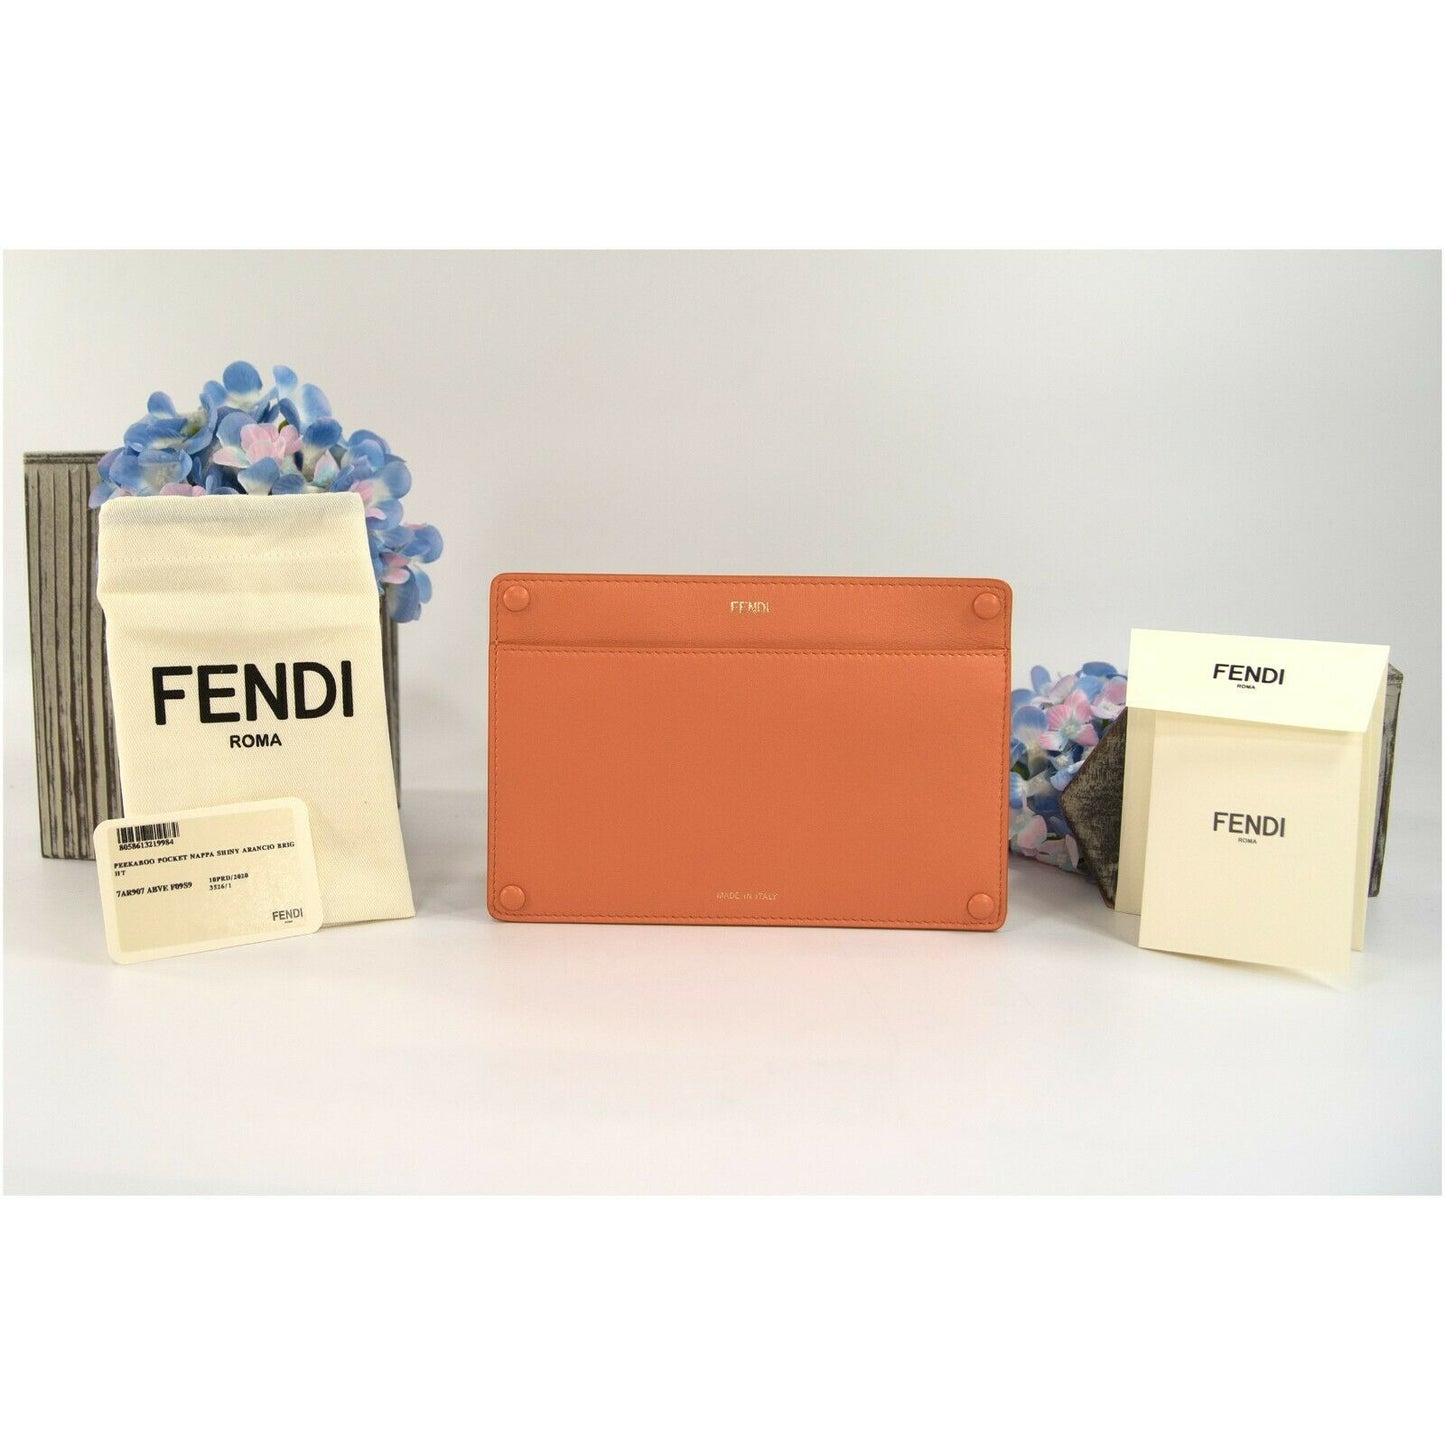 Fendi Peekaboo Pocket Large Coral Leather Flat Wallet Pouch NWT